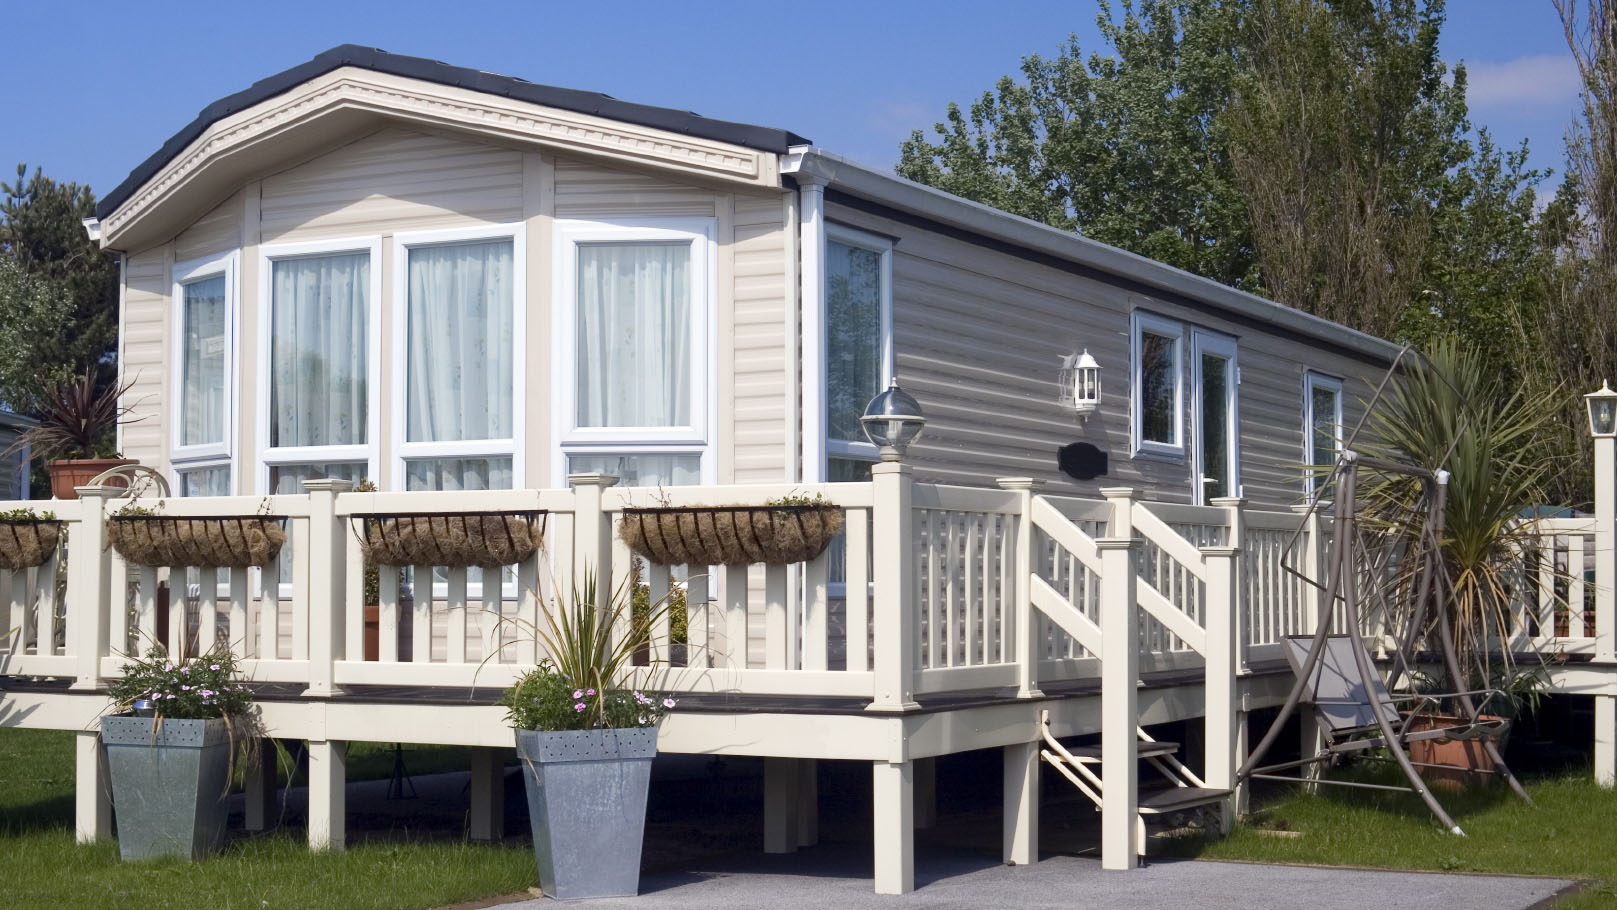 luxury mobile homes for rent near me